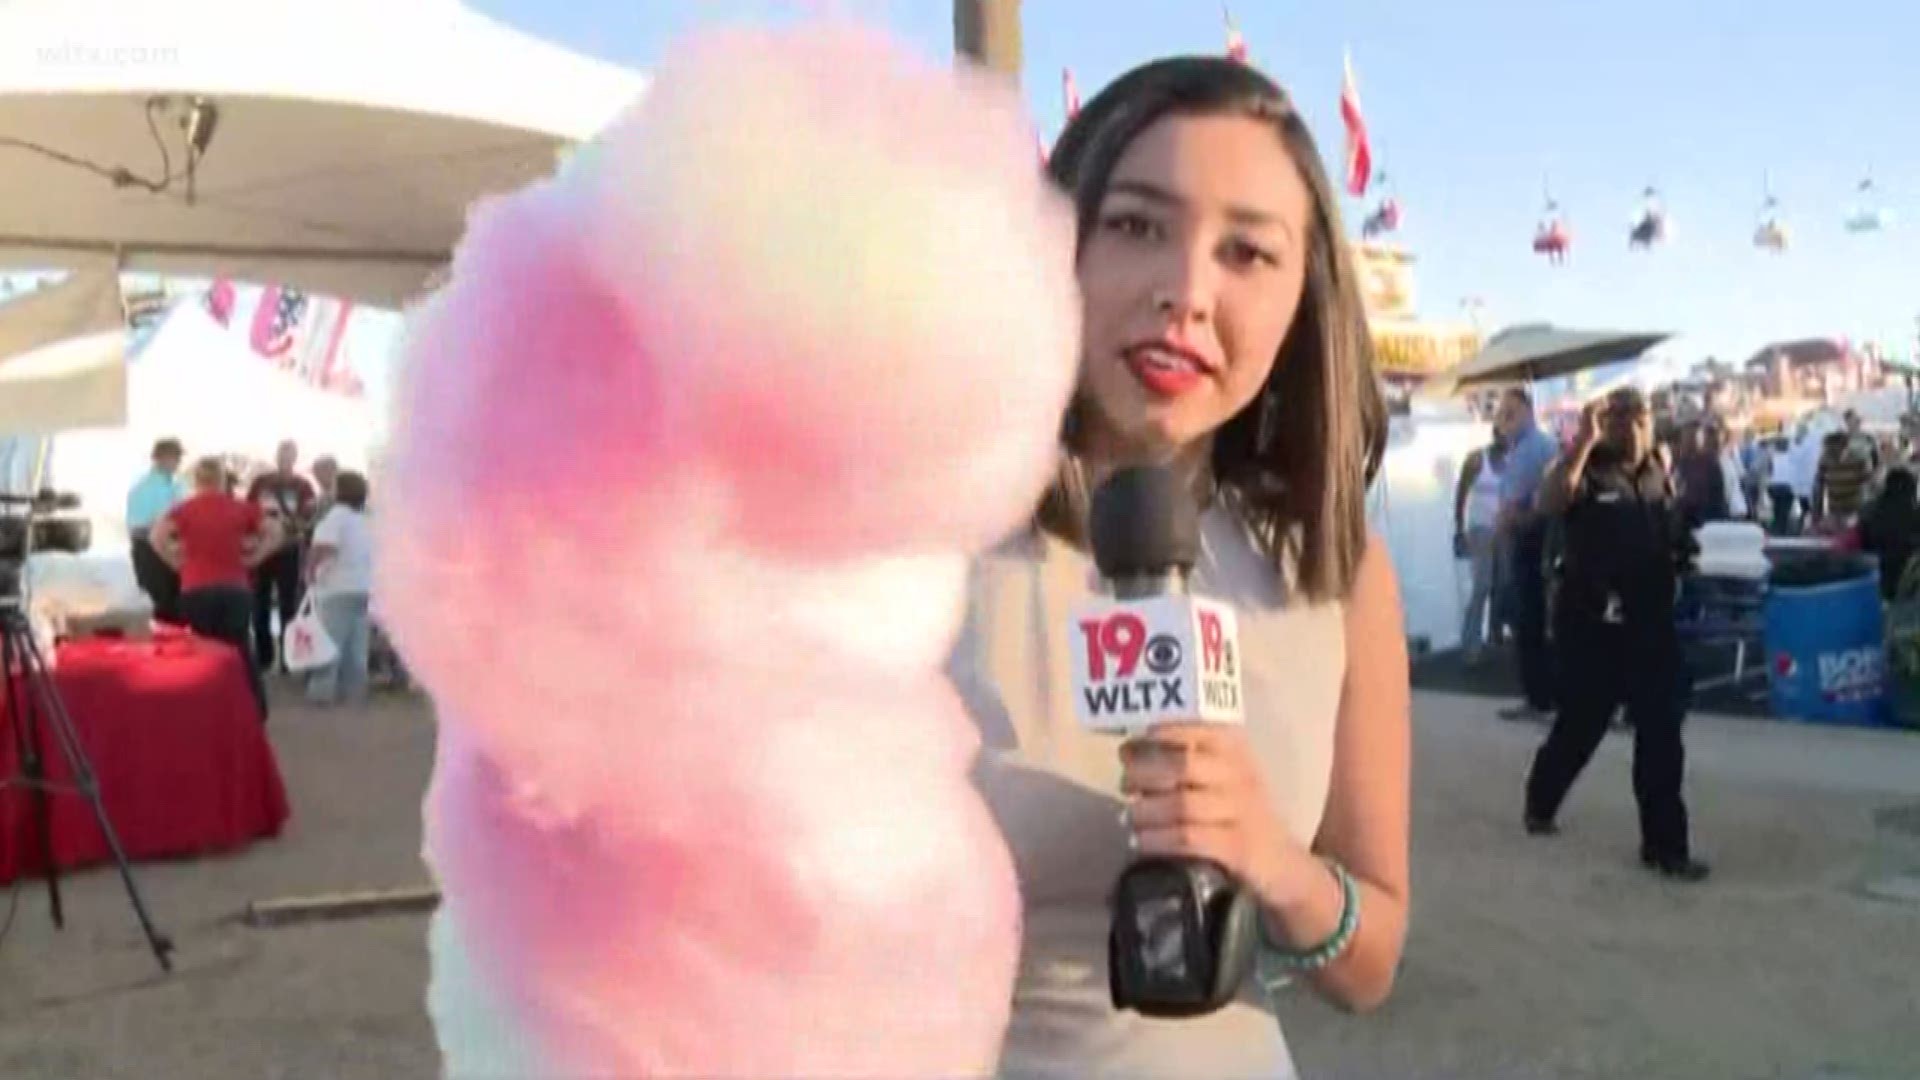 Sonia Gutierrez reports on all the food on a stick at the fair.